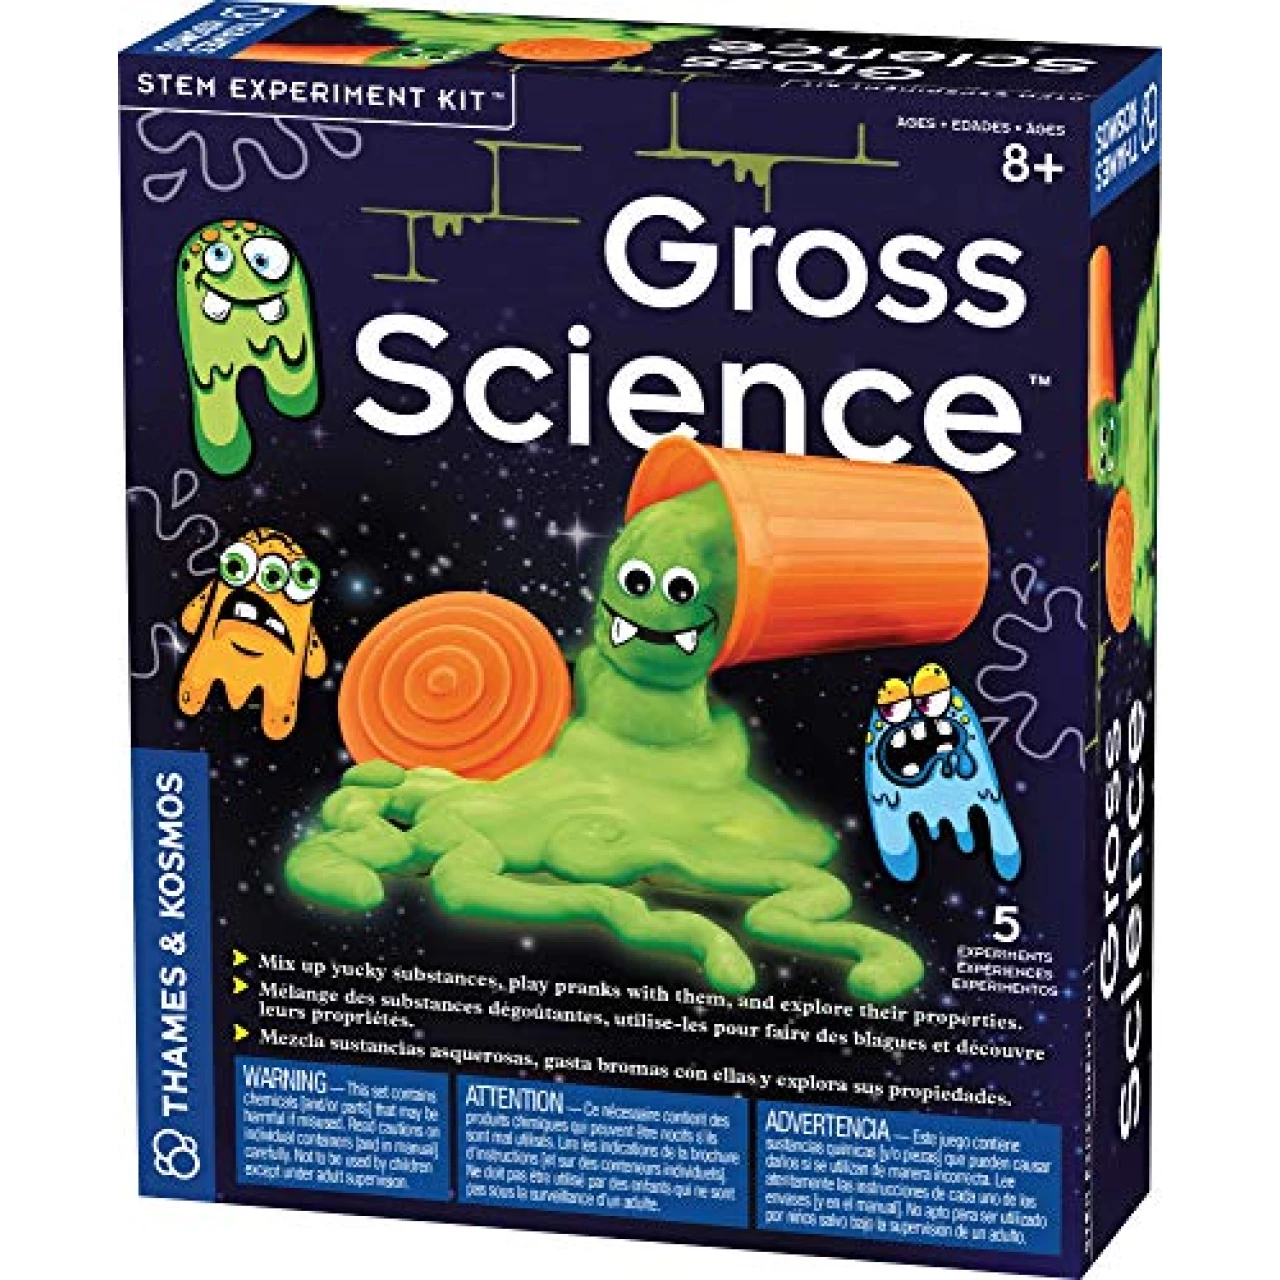 Thames &amp; Kosmos Gross Science STEM Experiment Kit | Mix Up 3 Types of Slime, Great for Pranks! | Explore Scientific Properties of Slime | 3-Language Instruction Manual (English, French, Spanish)